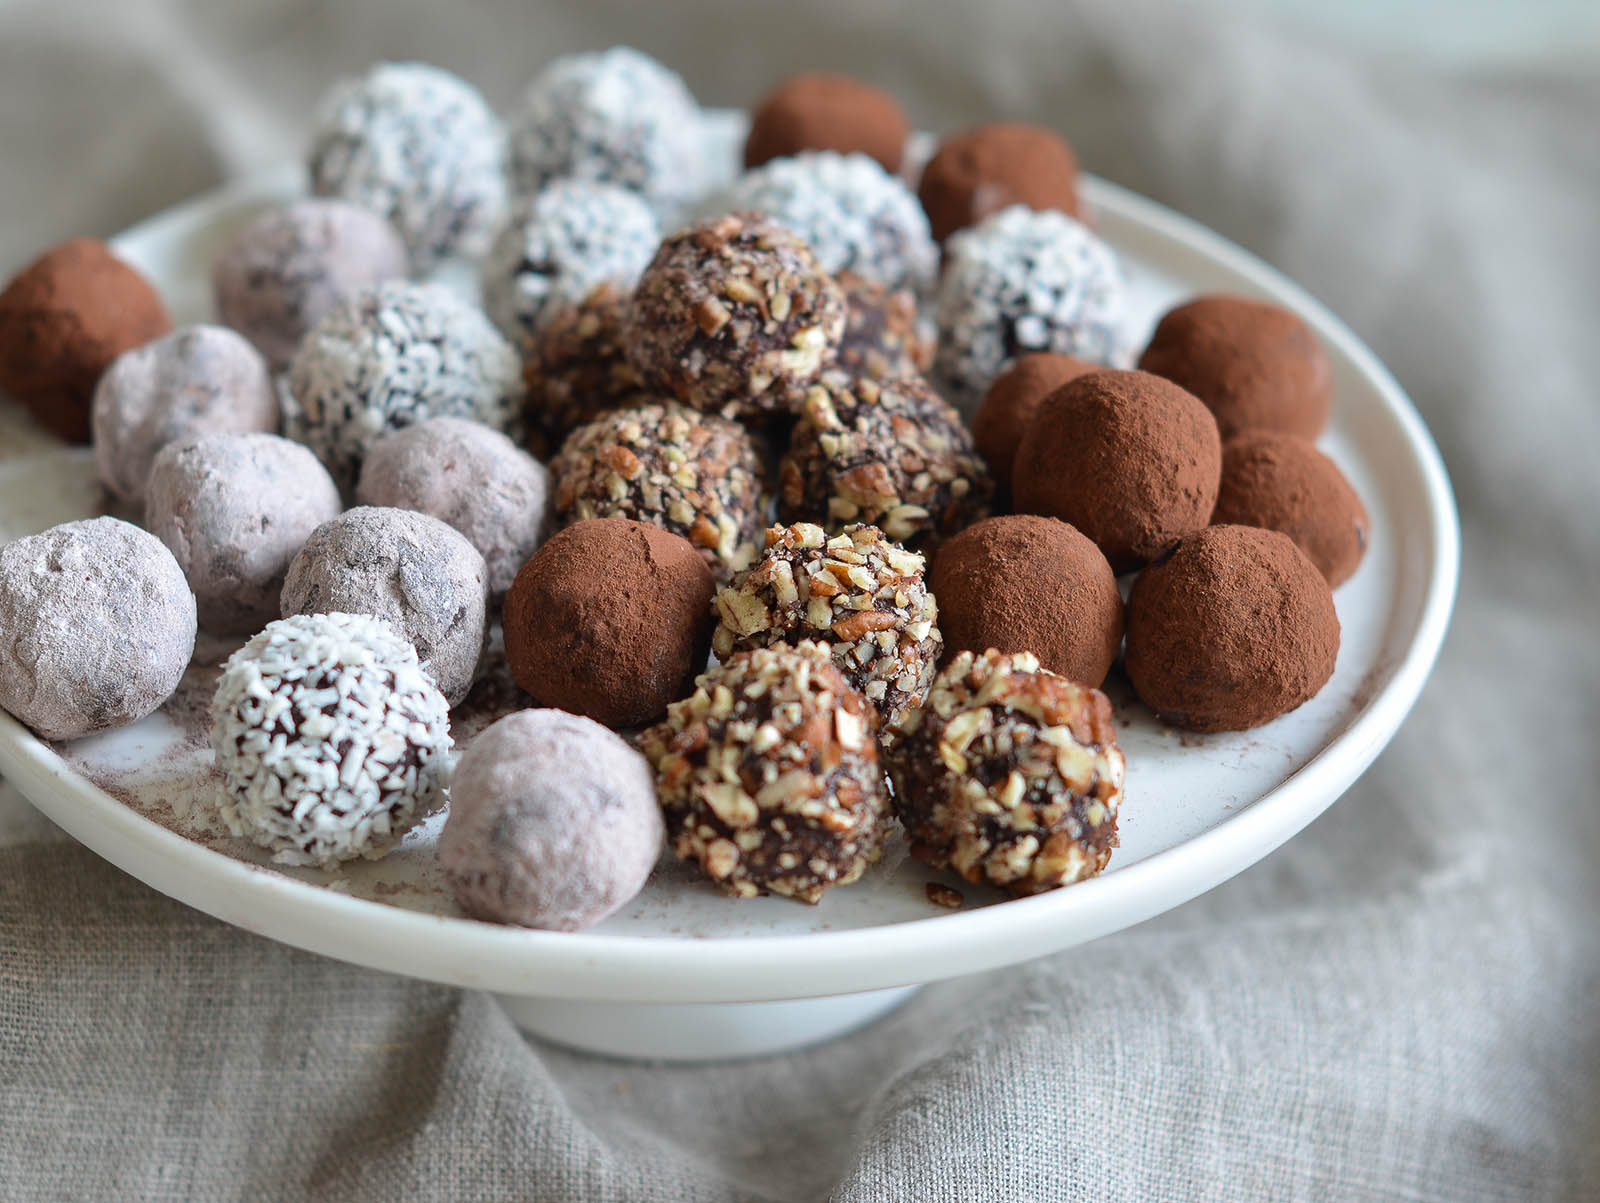 🍫 We Know Whether You’re an Introvert, Extrovert, Or Ambivert Based on How You Rate These Chocolate Desserts Chocolate truffles